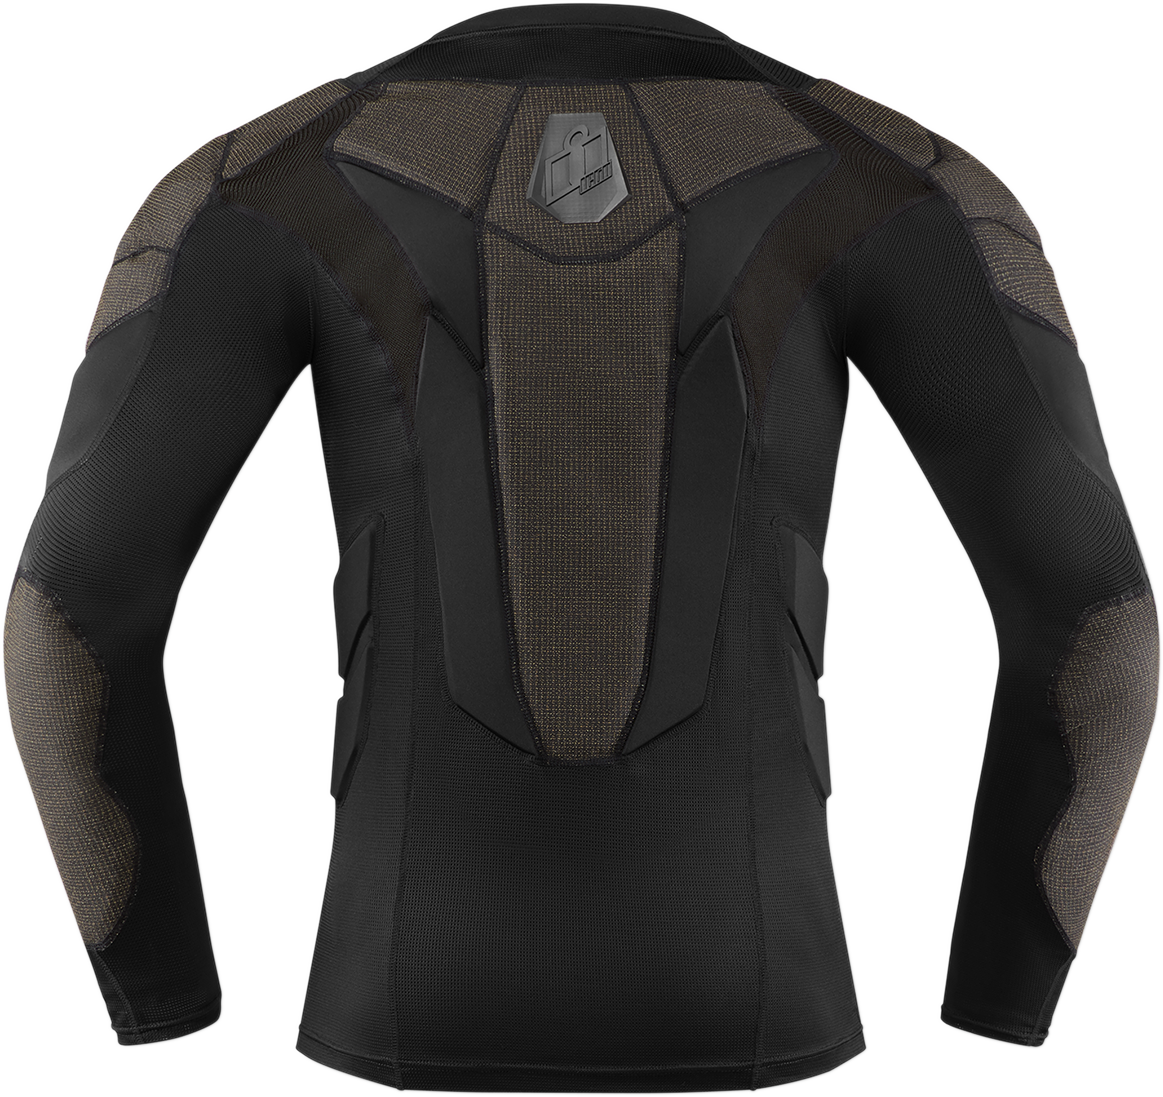 Icon Unisex Black Field Armor Chest Compression motorcycle Riding Under